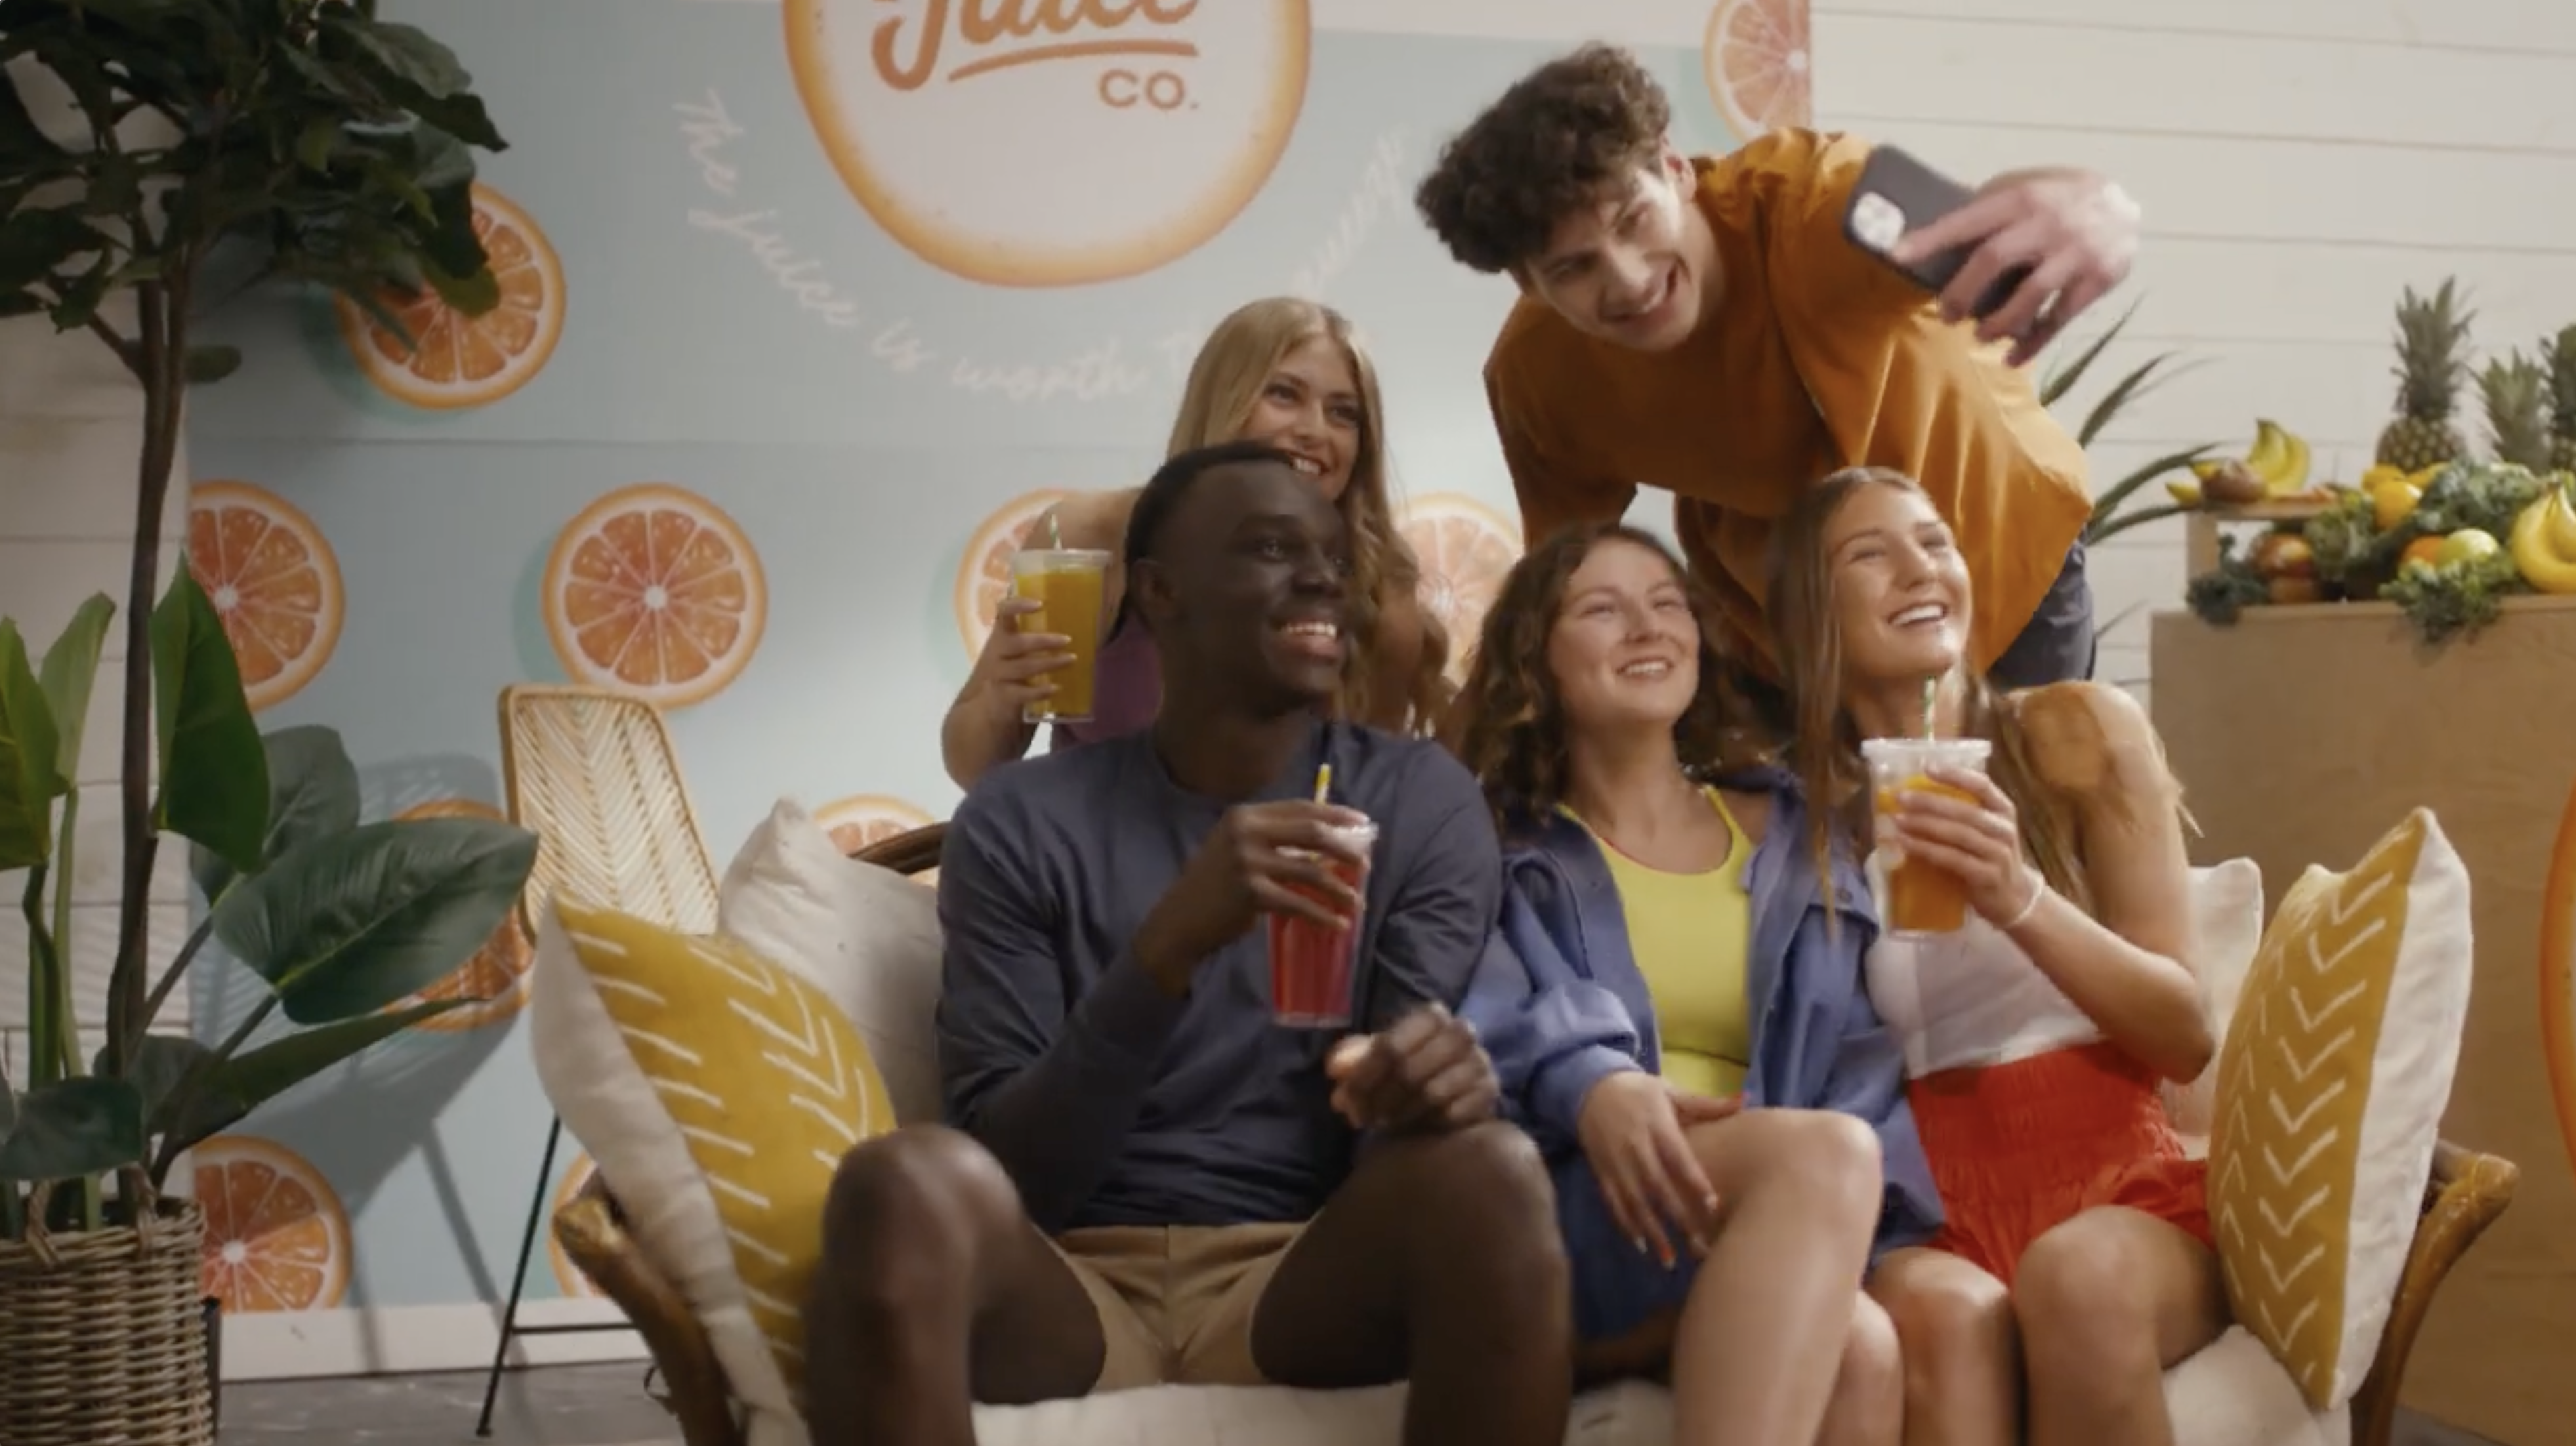 Five young adults sit together on a couch with drinks and take a group photo